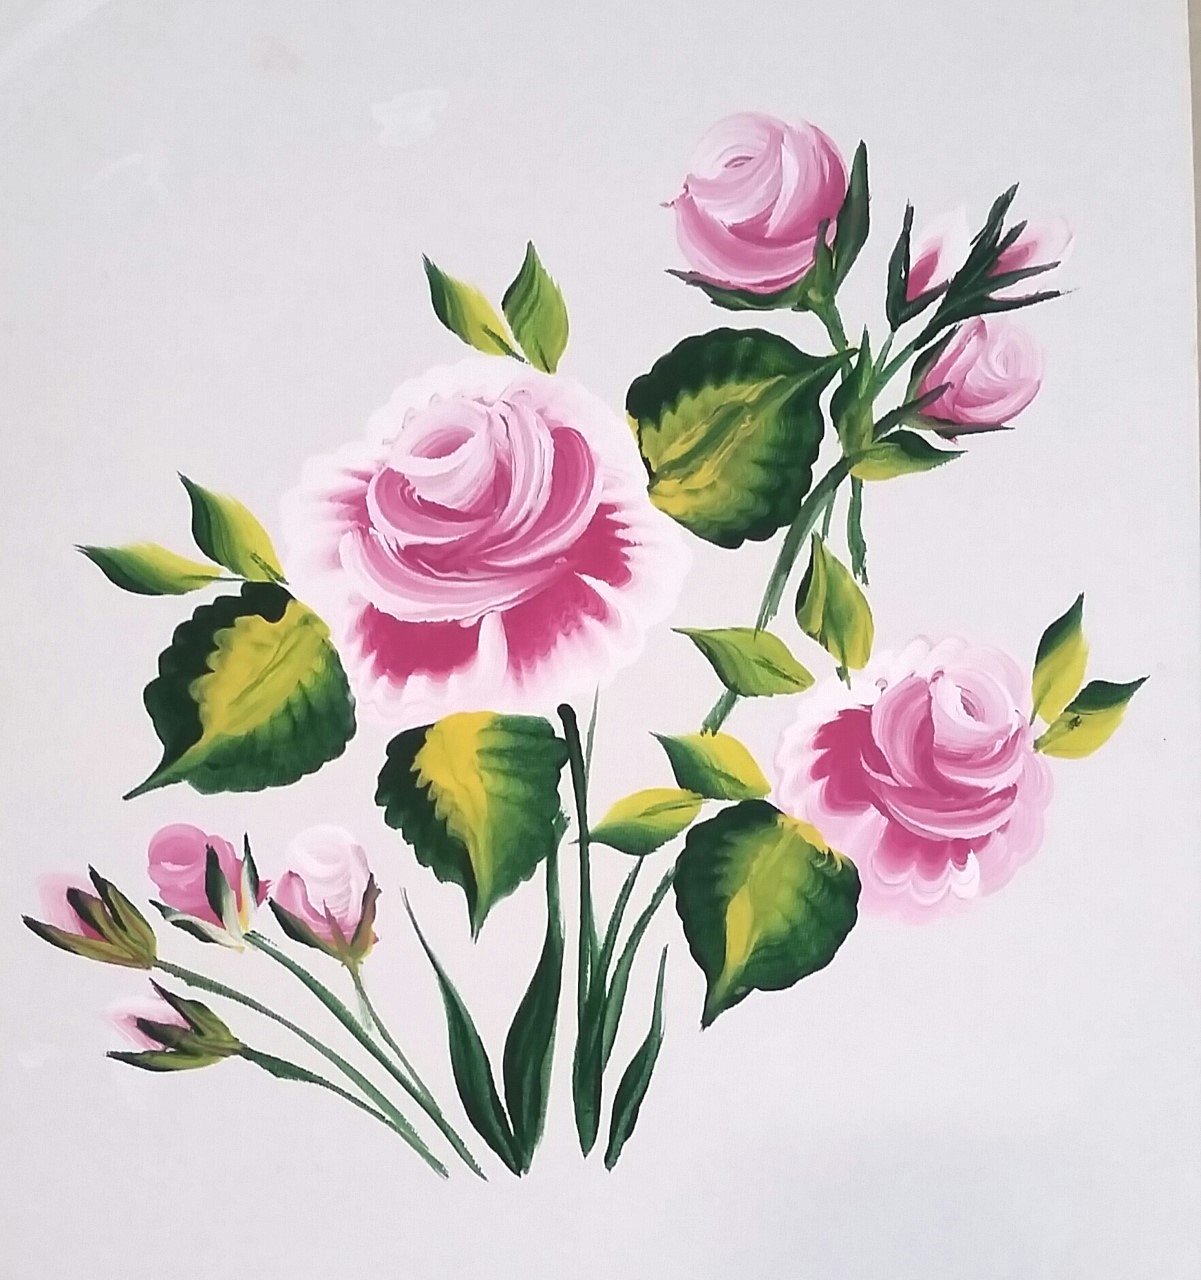 A painting of pink roses on a white background using the one stroke painting technique.